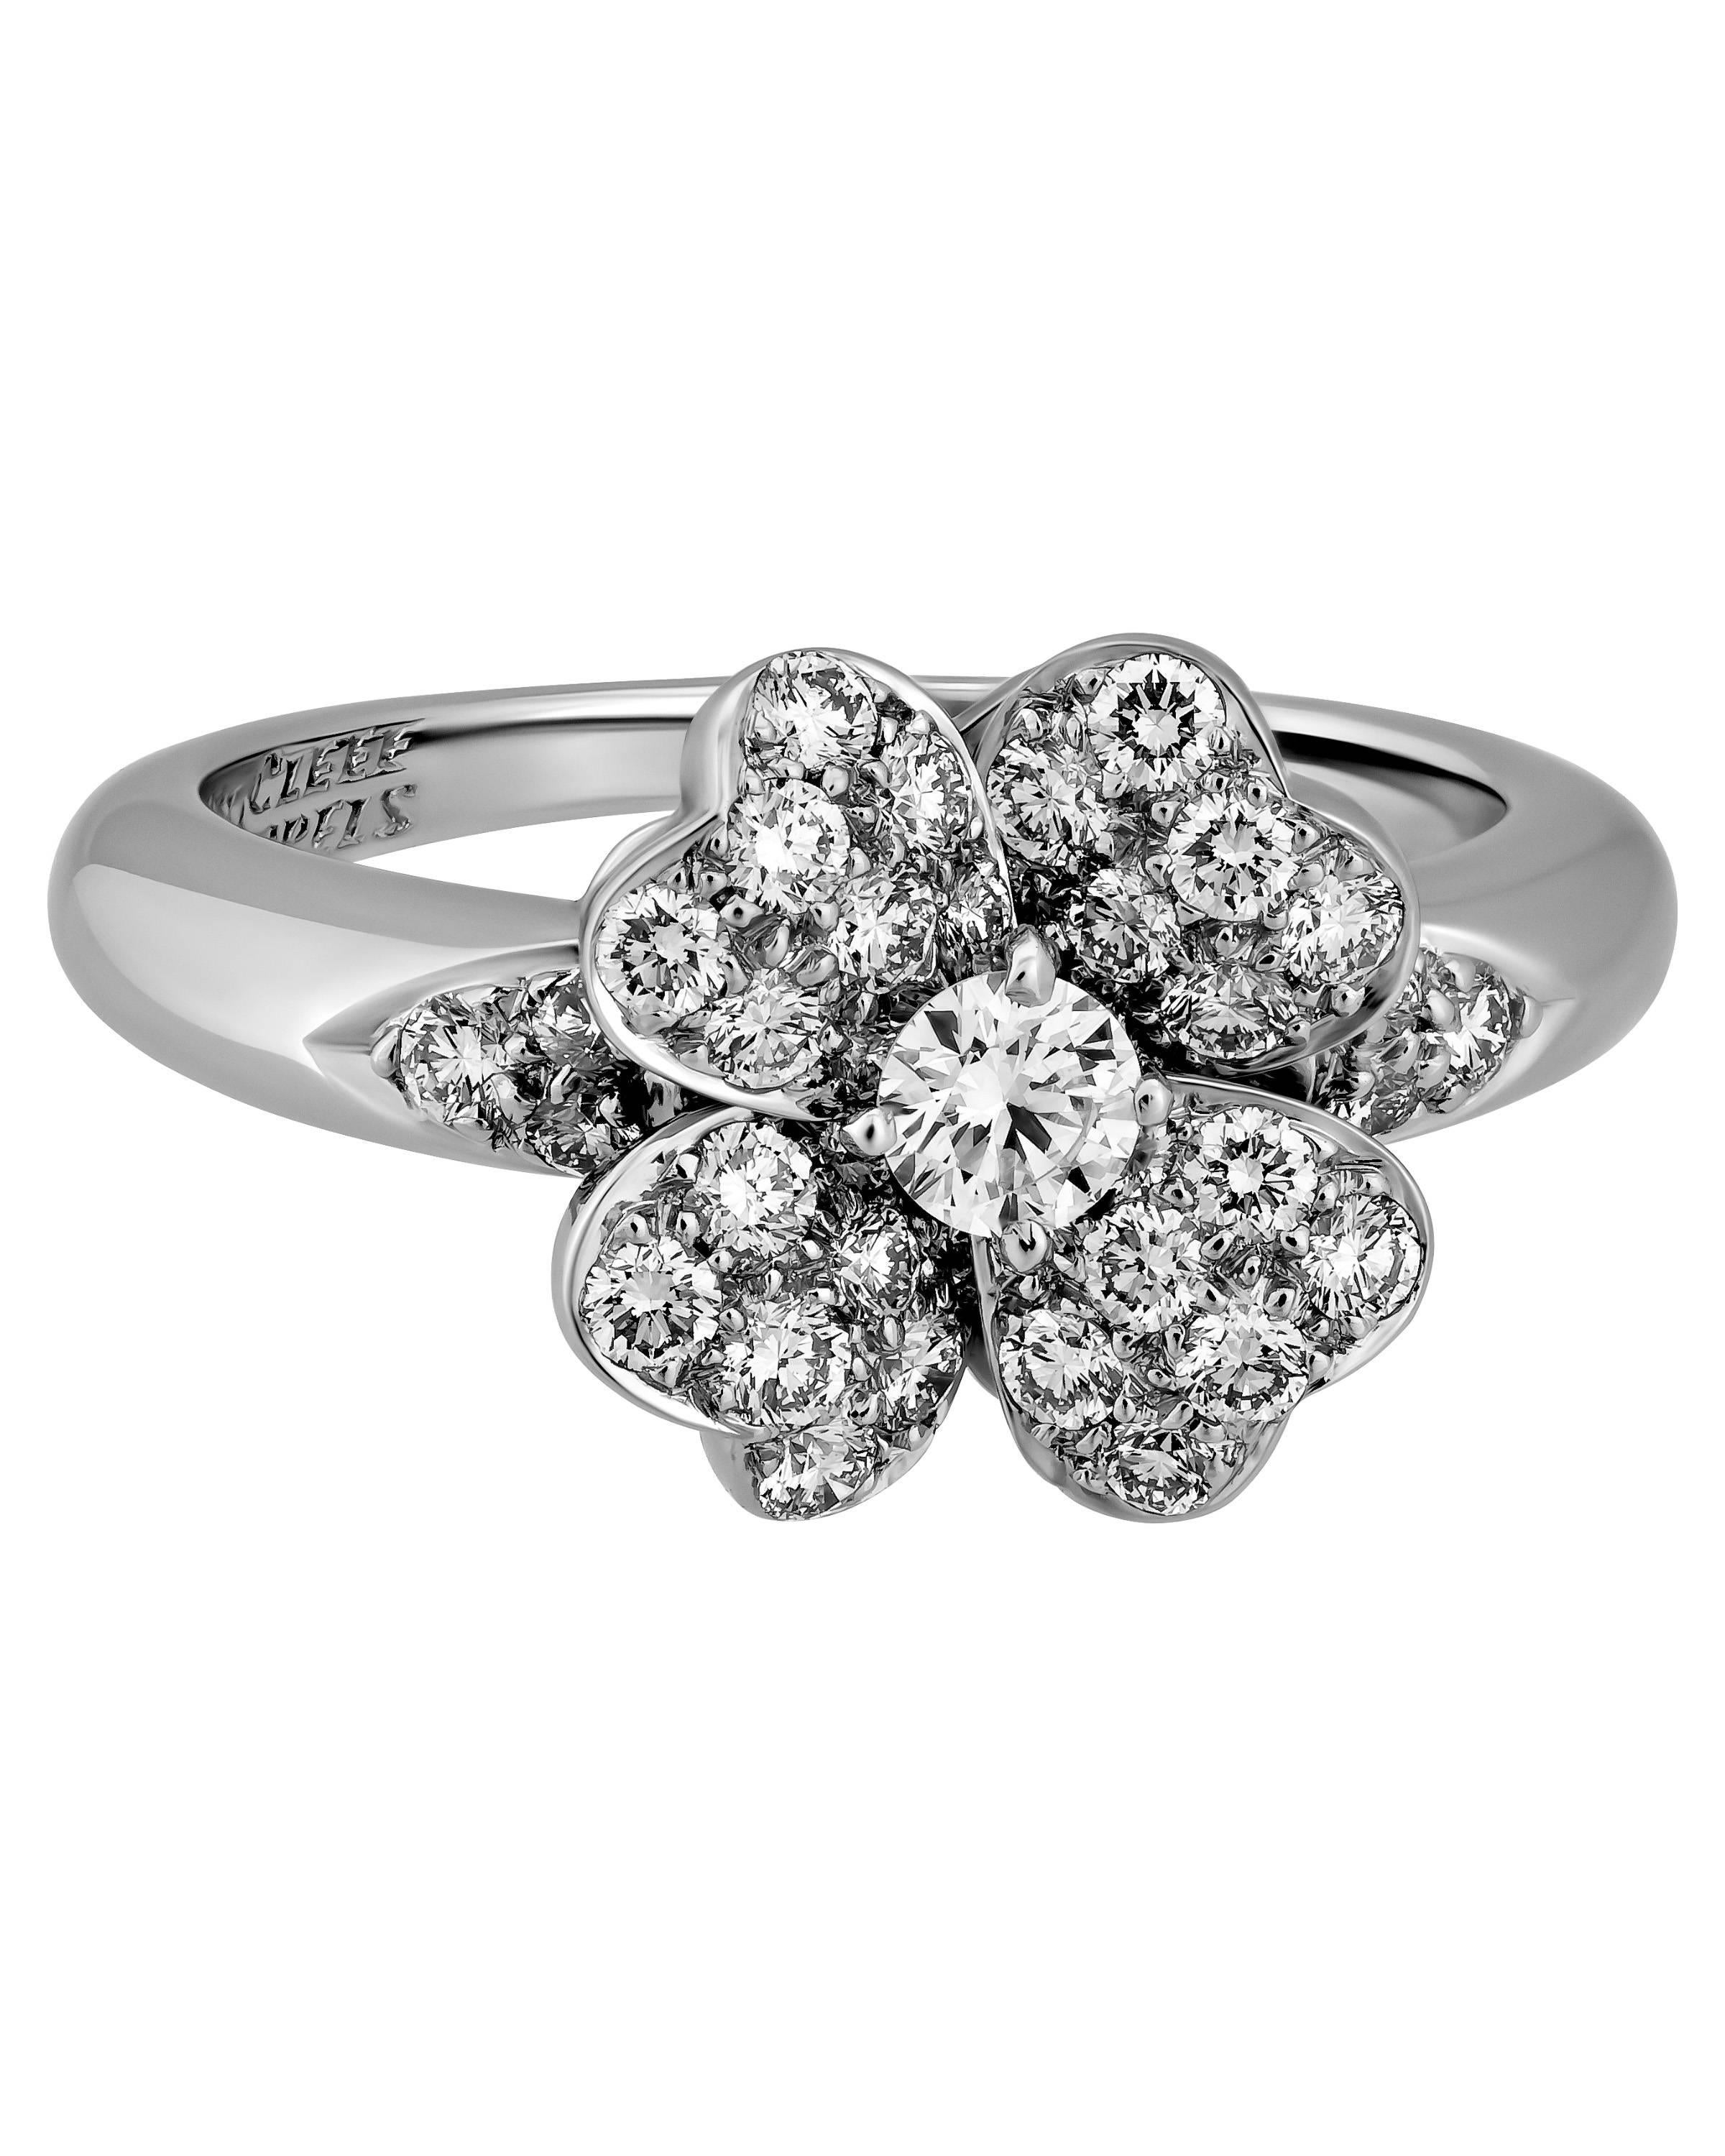 Van Cleef & Arpels 950 platinum diamond cosmos ring.
This stunning platinum diamond Cosmos ring is a size 6 and contains 1.60pts TCW. The total weight of this gorgeous VCA ring is 7.1 grams. The Hallmarked reads Van Cleef & Arpels, PT 950.